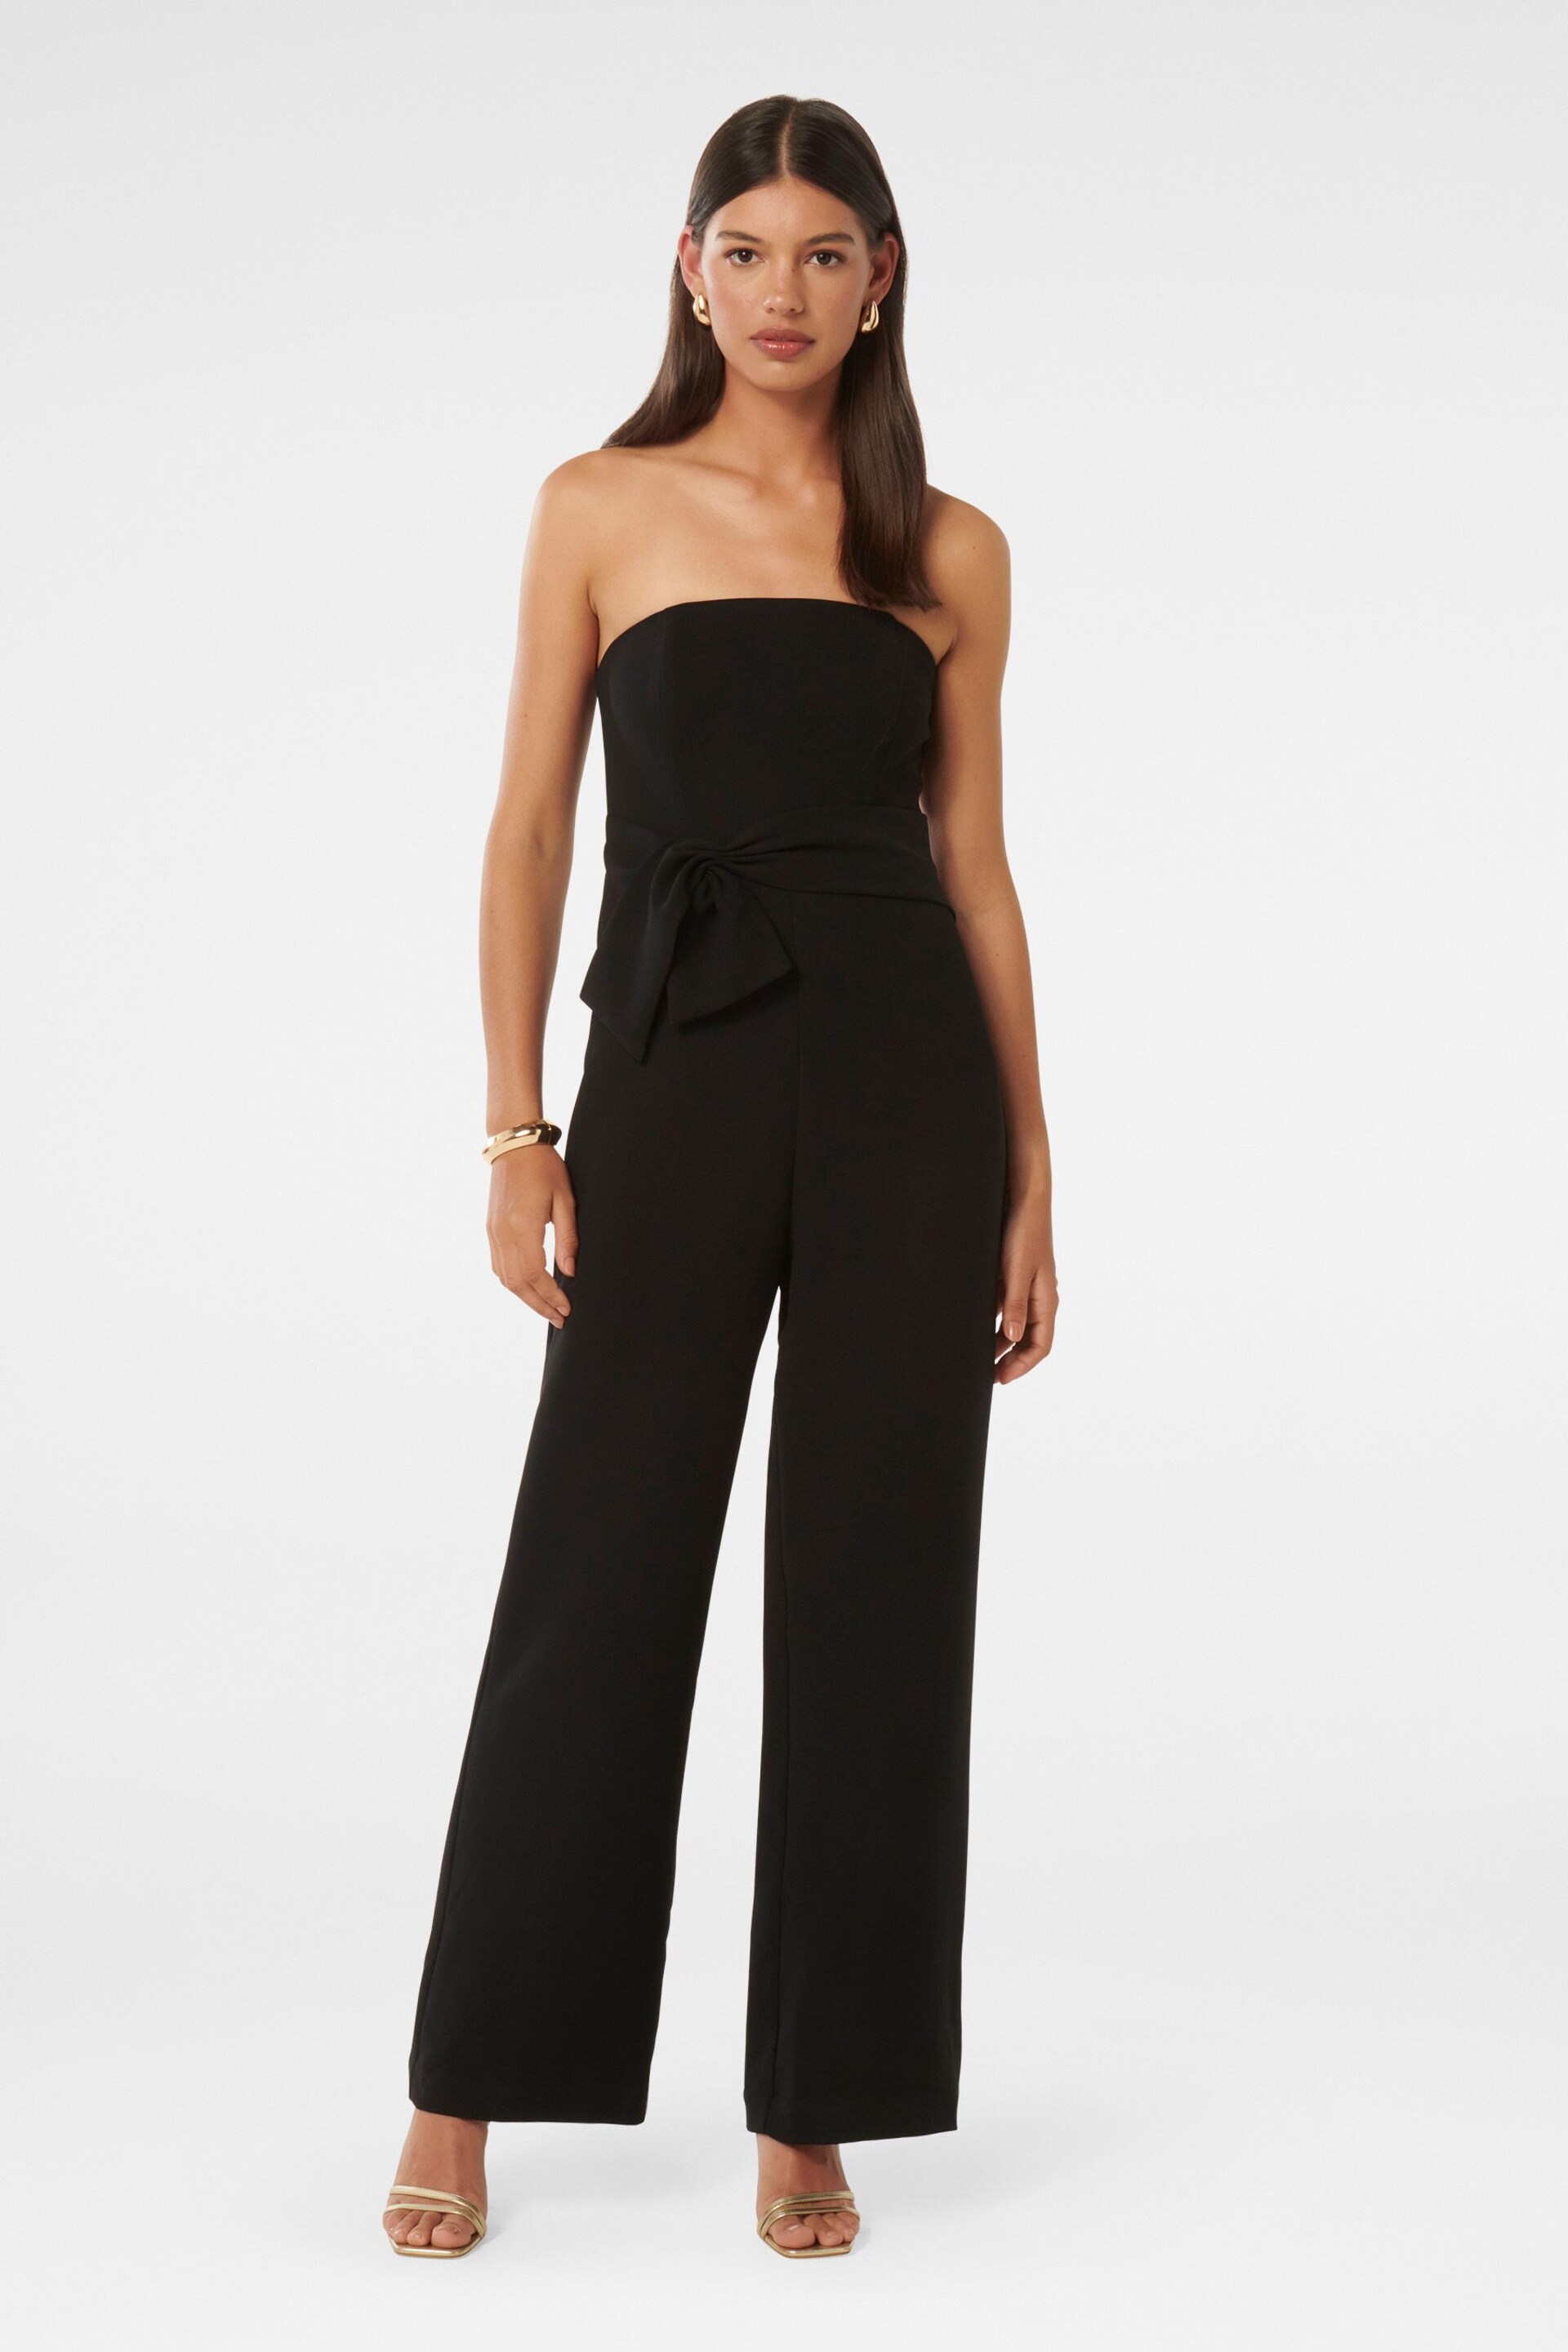 Forever New Black Vicky Strapless Bow Jumpsuit - Image 1 of 4